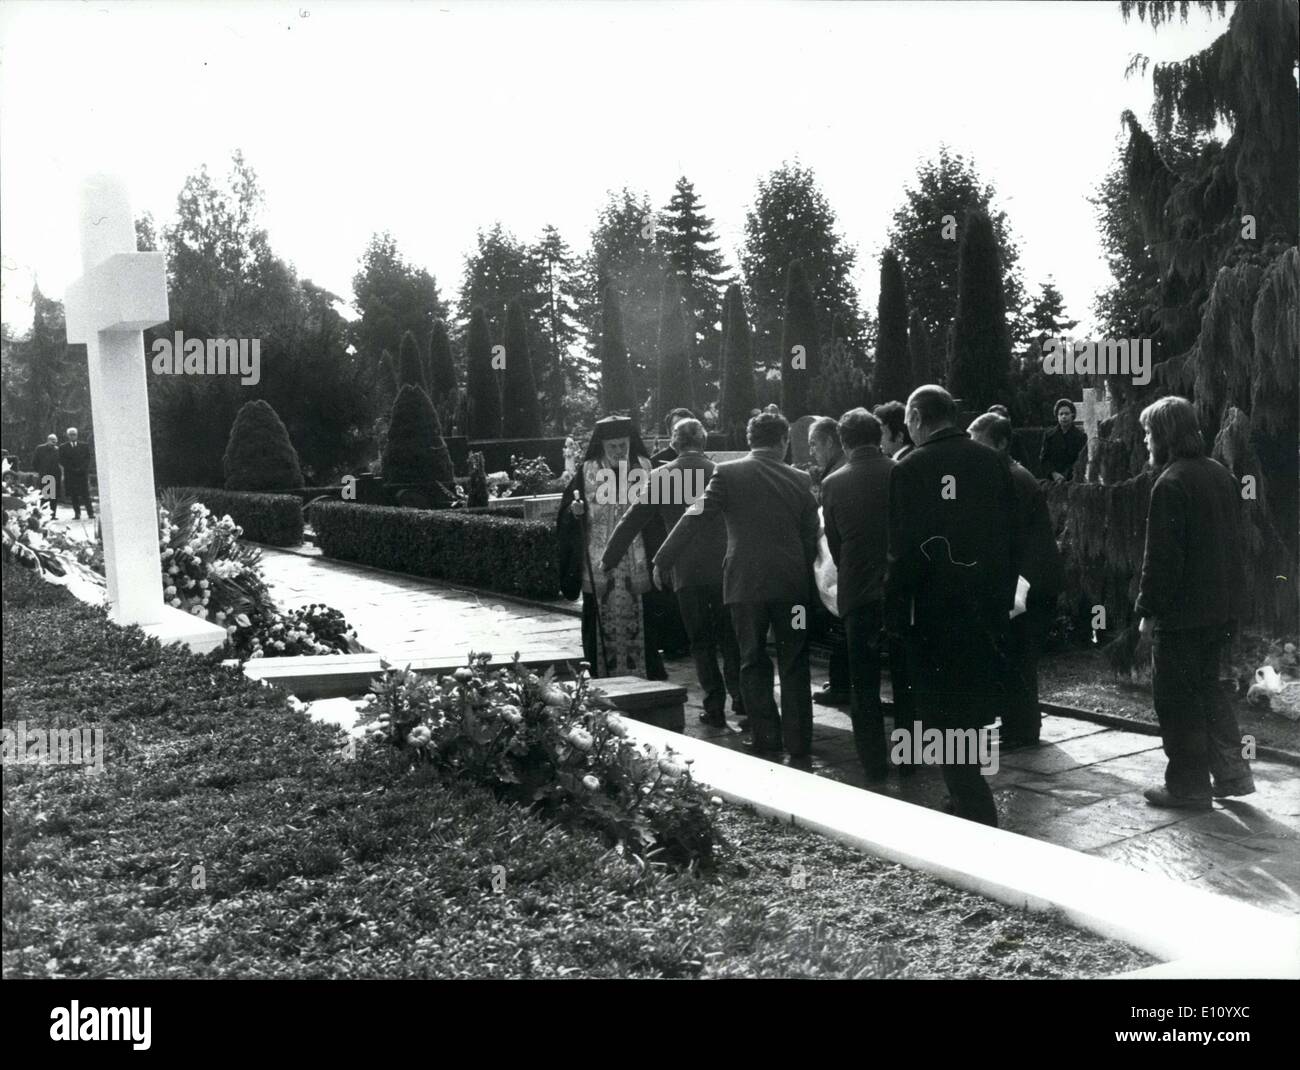 Oct. 17, 1974 - The Funerals of Tina Niarchos: The funerals of Tina Niarchos who died last week in Paris took place at the cimitery ''Bois de vaux'' in Lausanne, Switzerland, with the presence of the whole Niarchos and part of the Onassis family. Photo shows the metropolite of Paris and the mourning family at the family grave of the Niarchos. Stock Photo